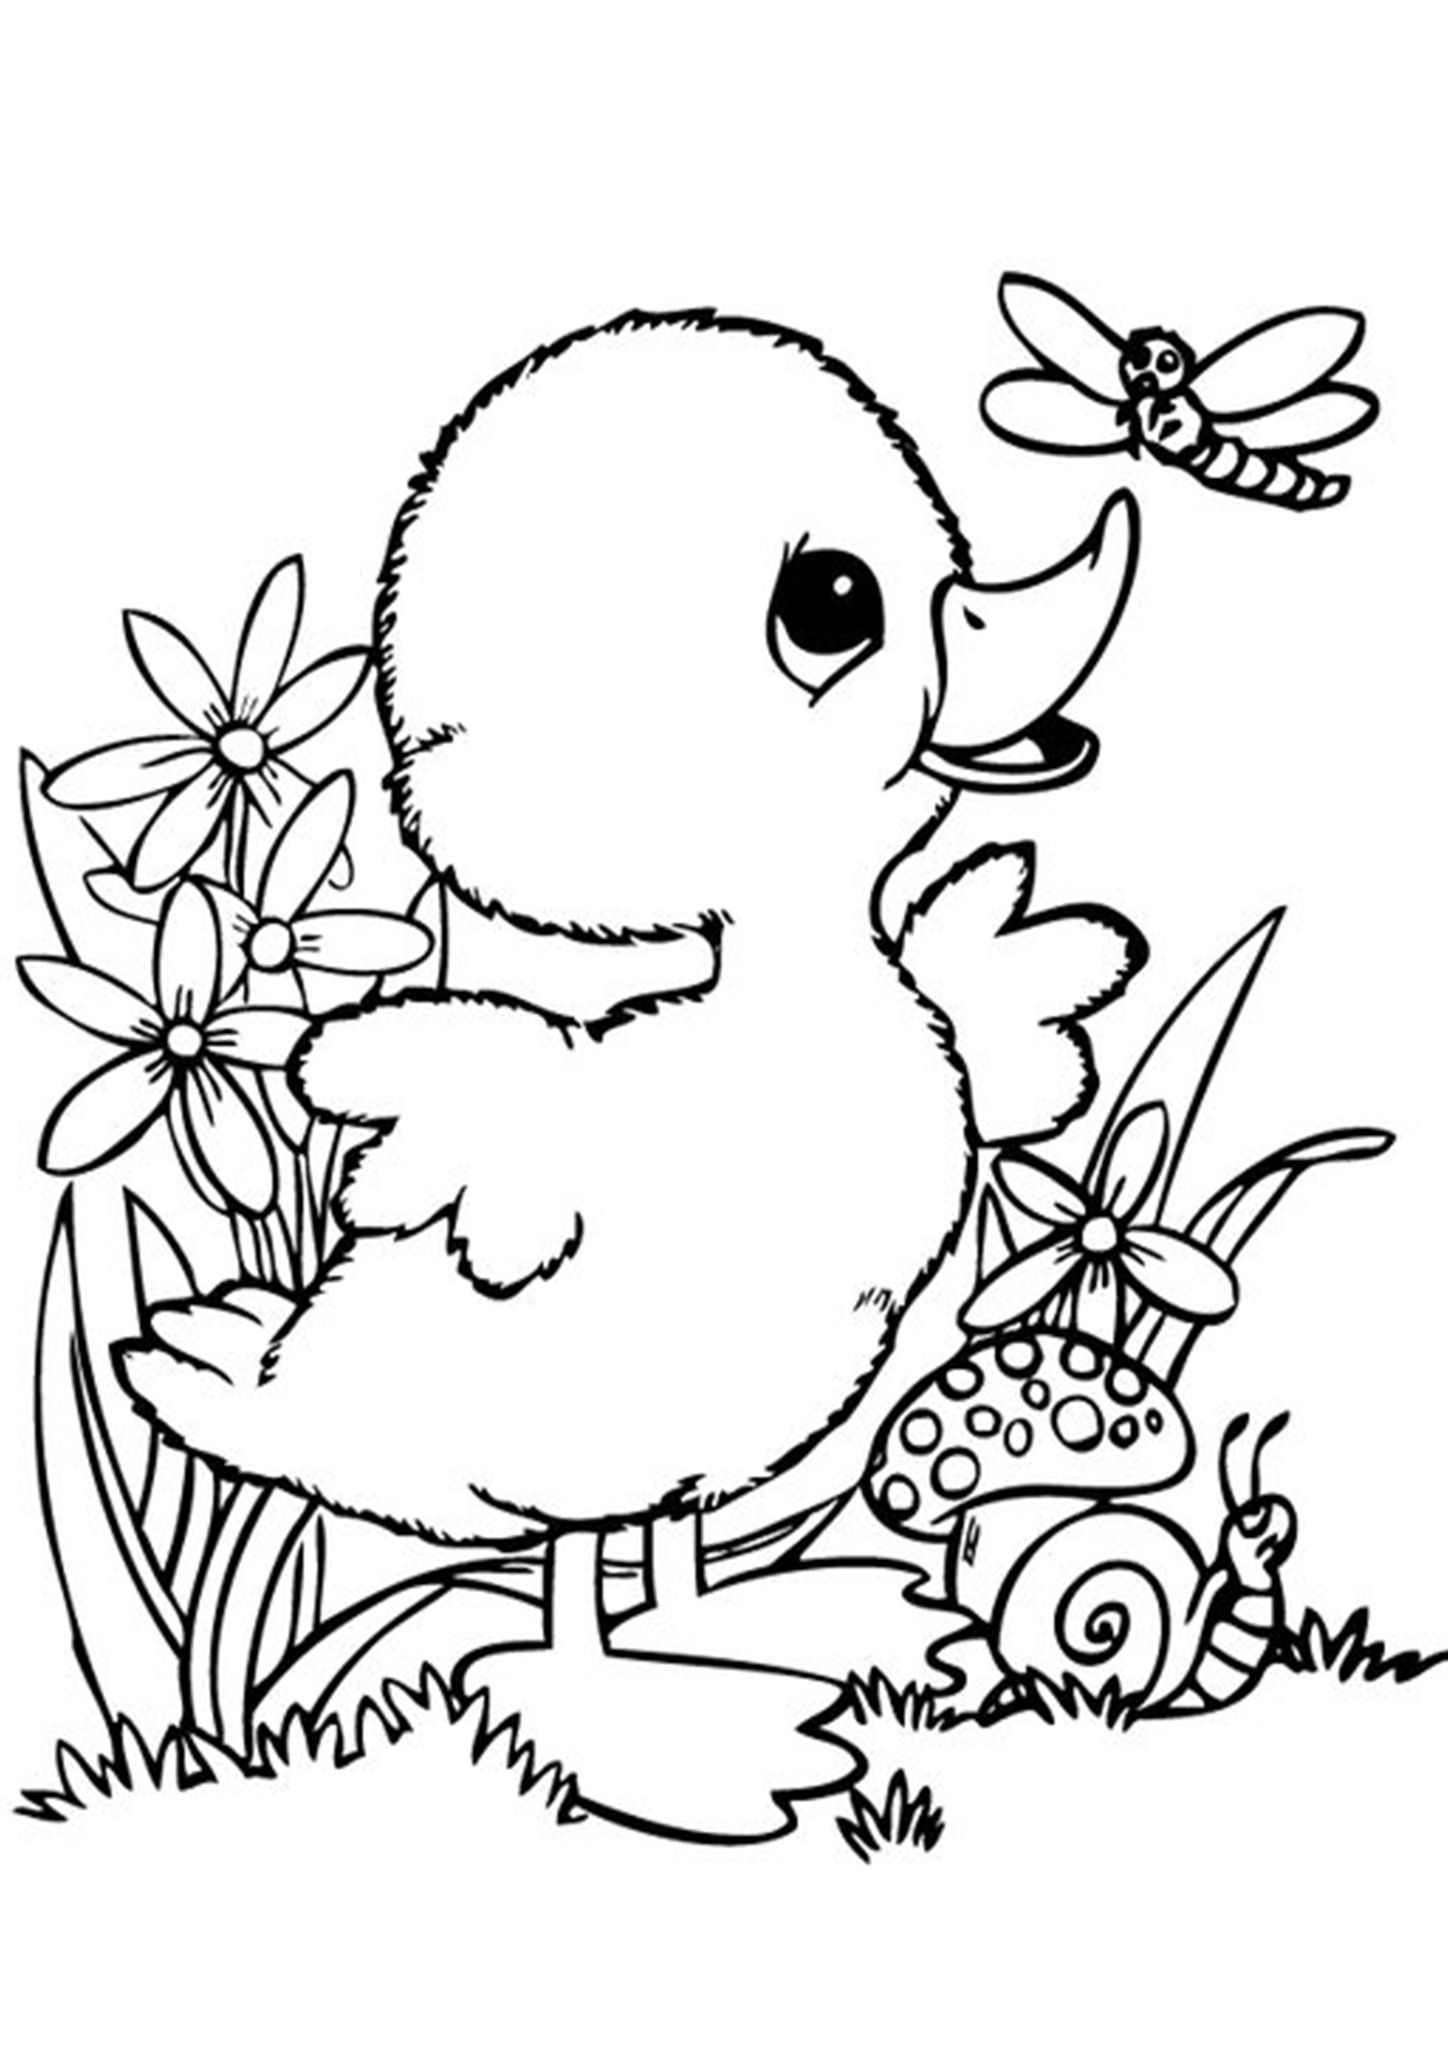 Free easy to print duck coloring pages hayvan boyama sayfalarä boyama sayfalarä boyama kitabä